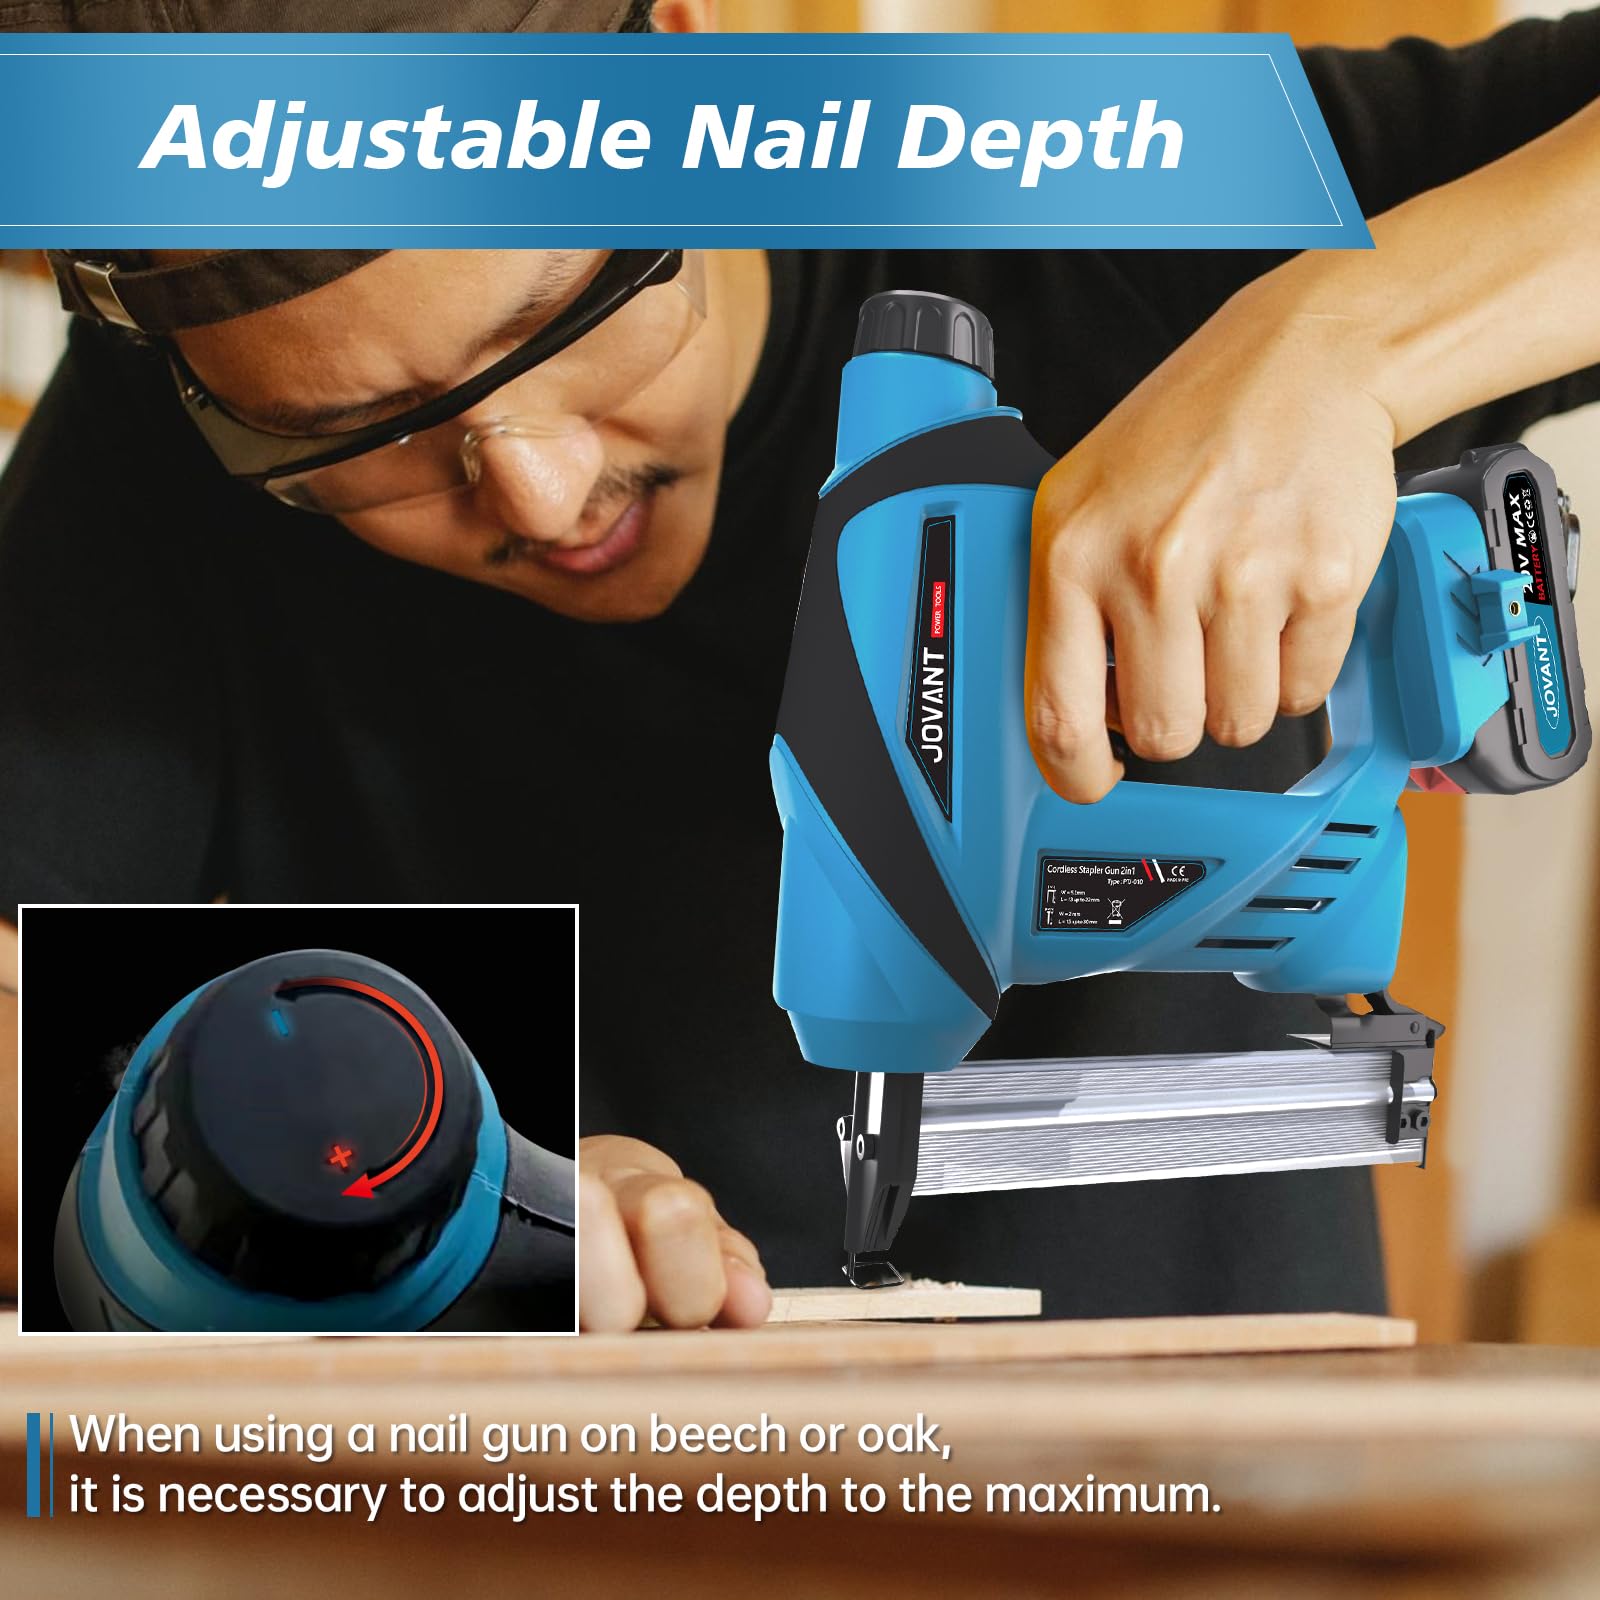 Adjustable Nail Depth: When using a nail gun on beech or oak, it is necessary to adjust the depth to the maximum.